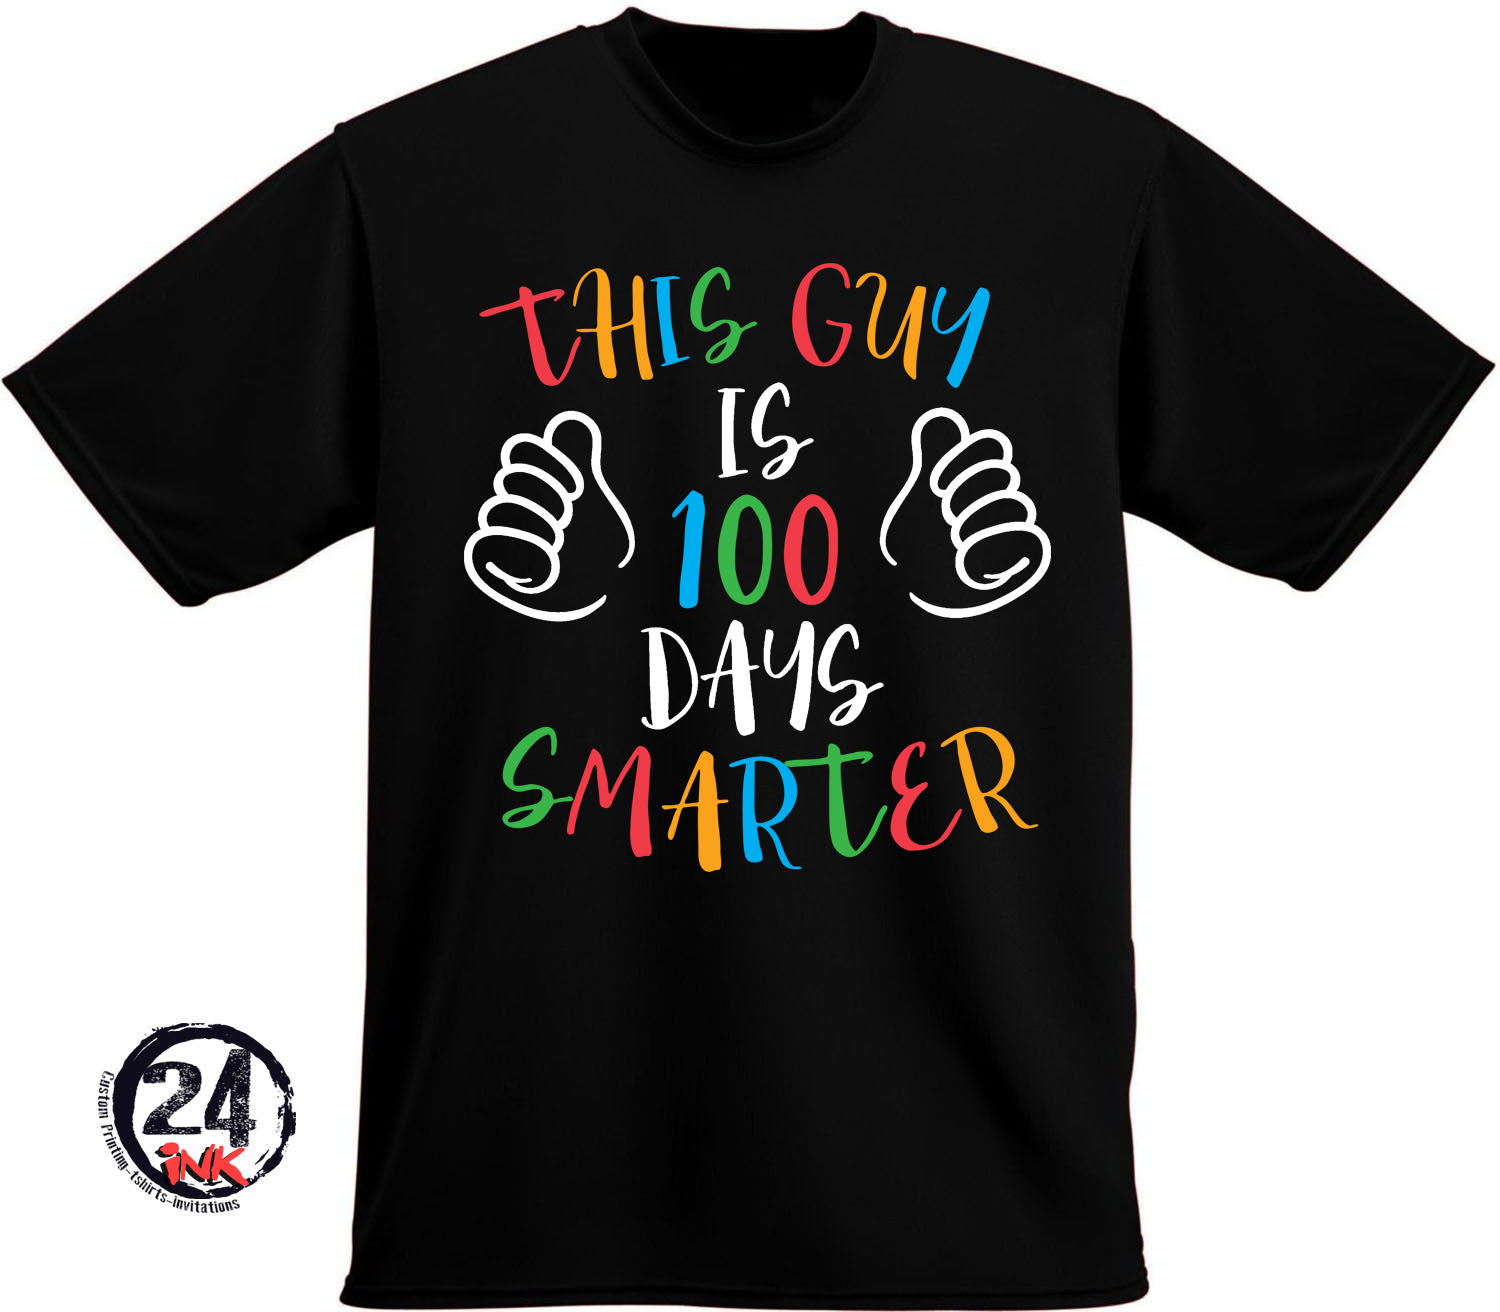 This guy is 100 days 100 days of School T-shirt